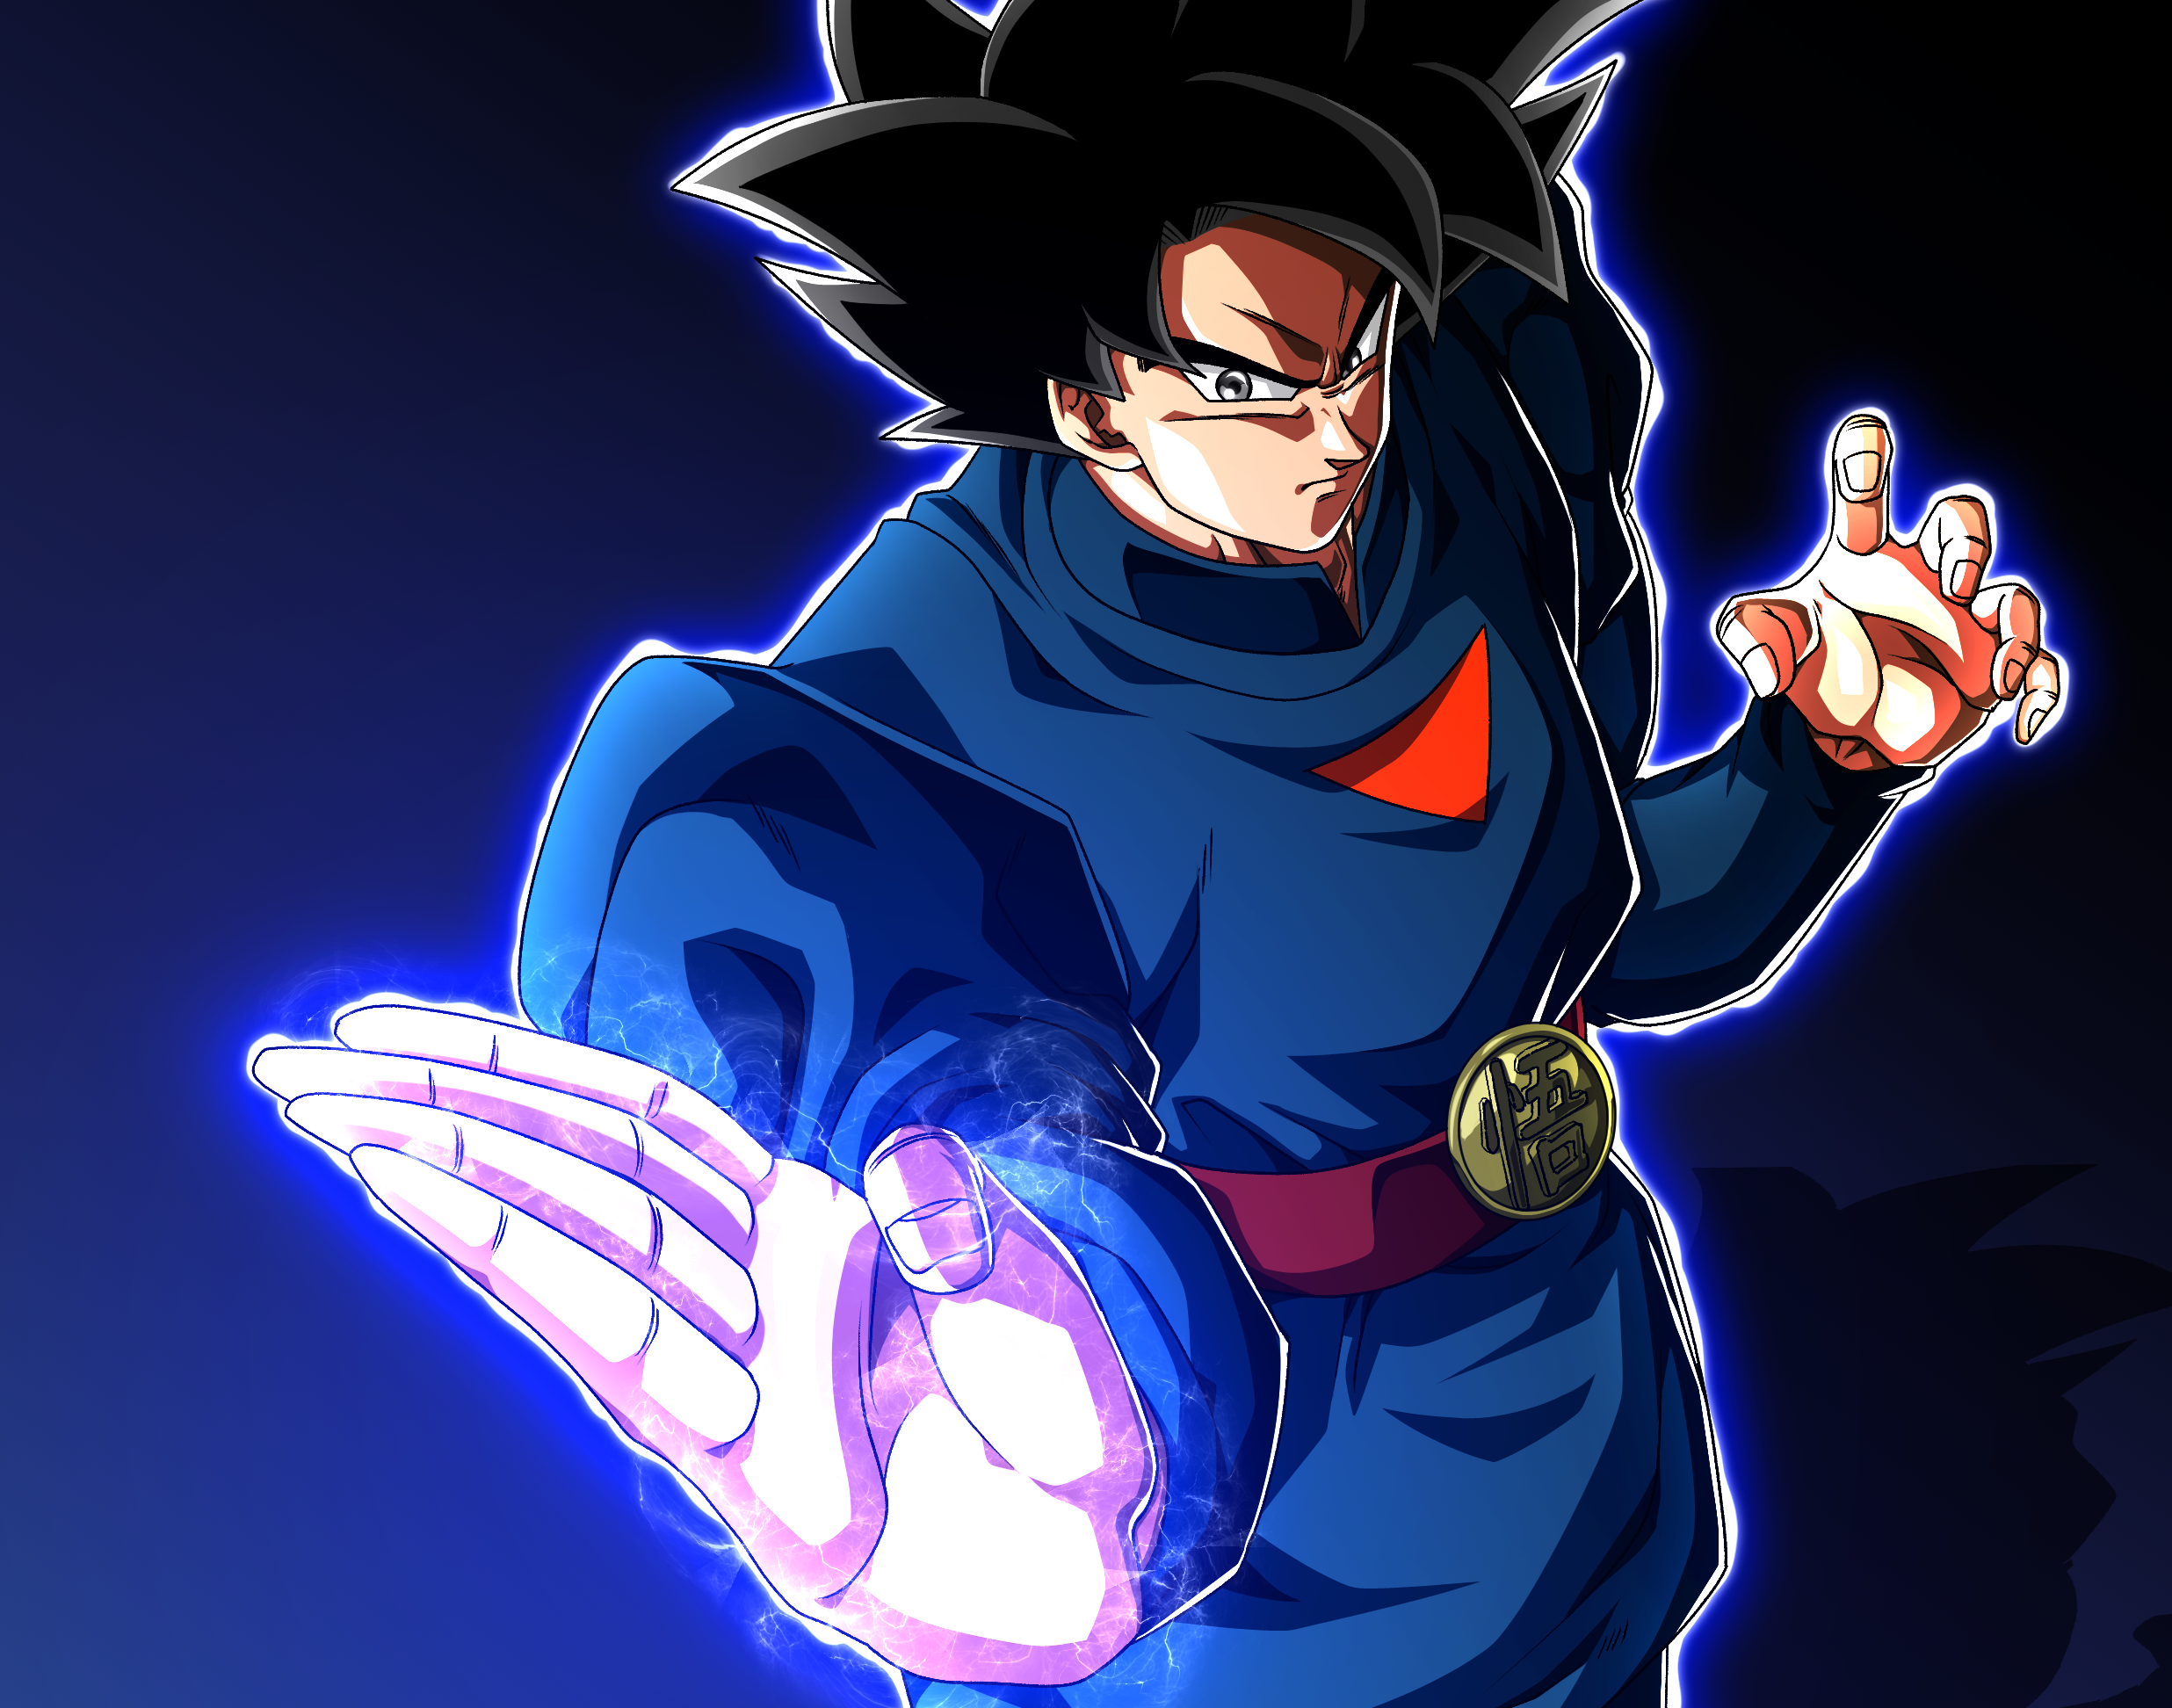 Son Goku Grand Master / Priest Form by Duy Anh Nguyen